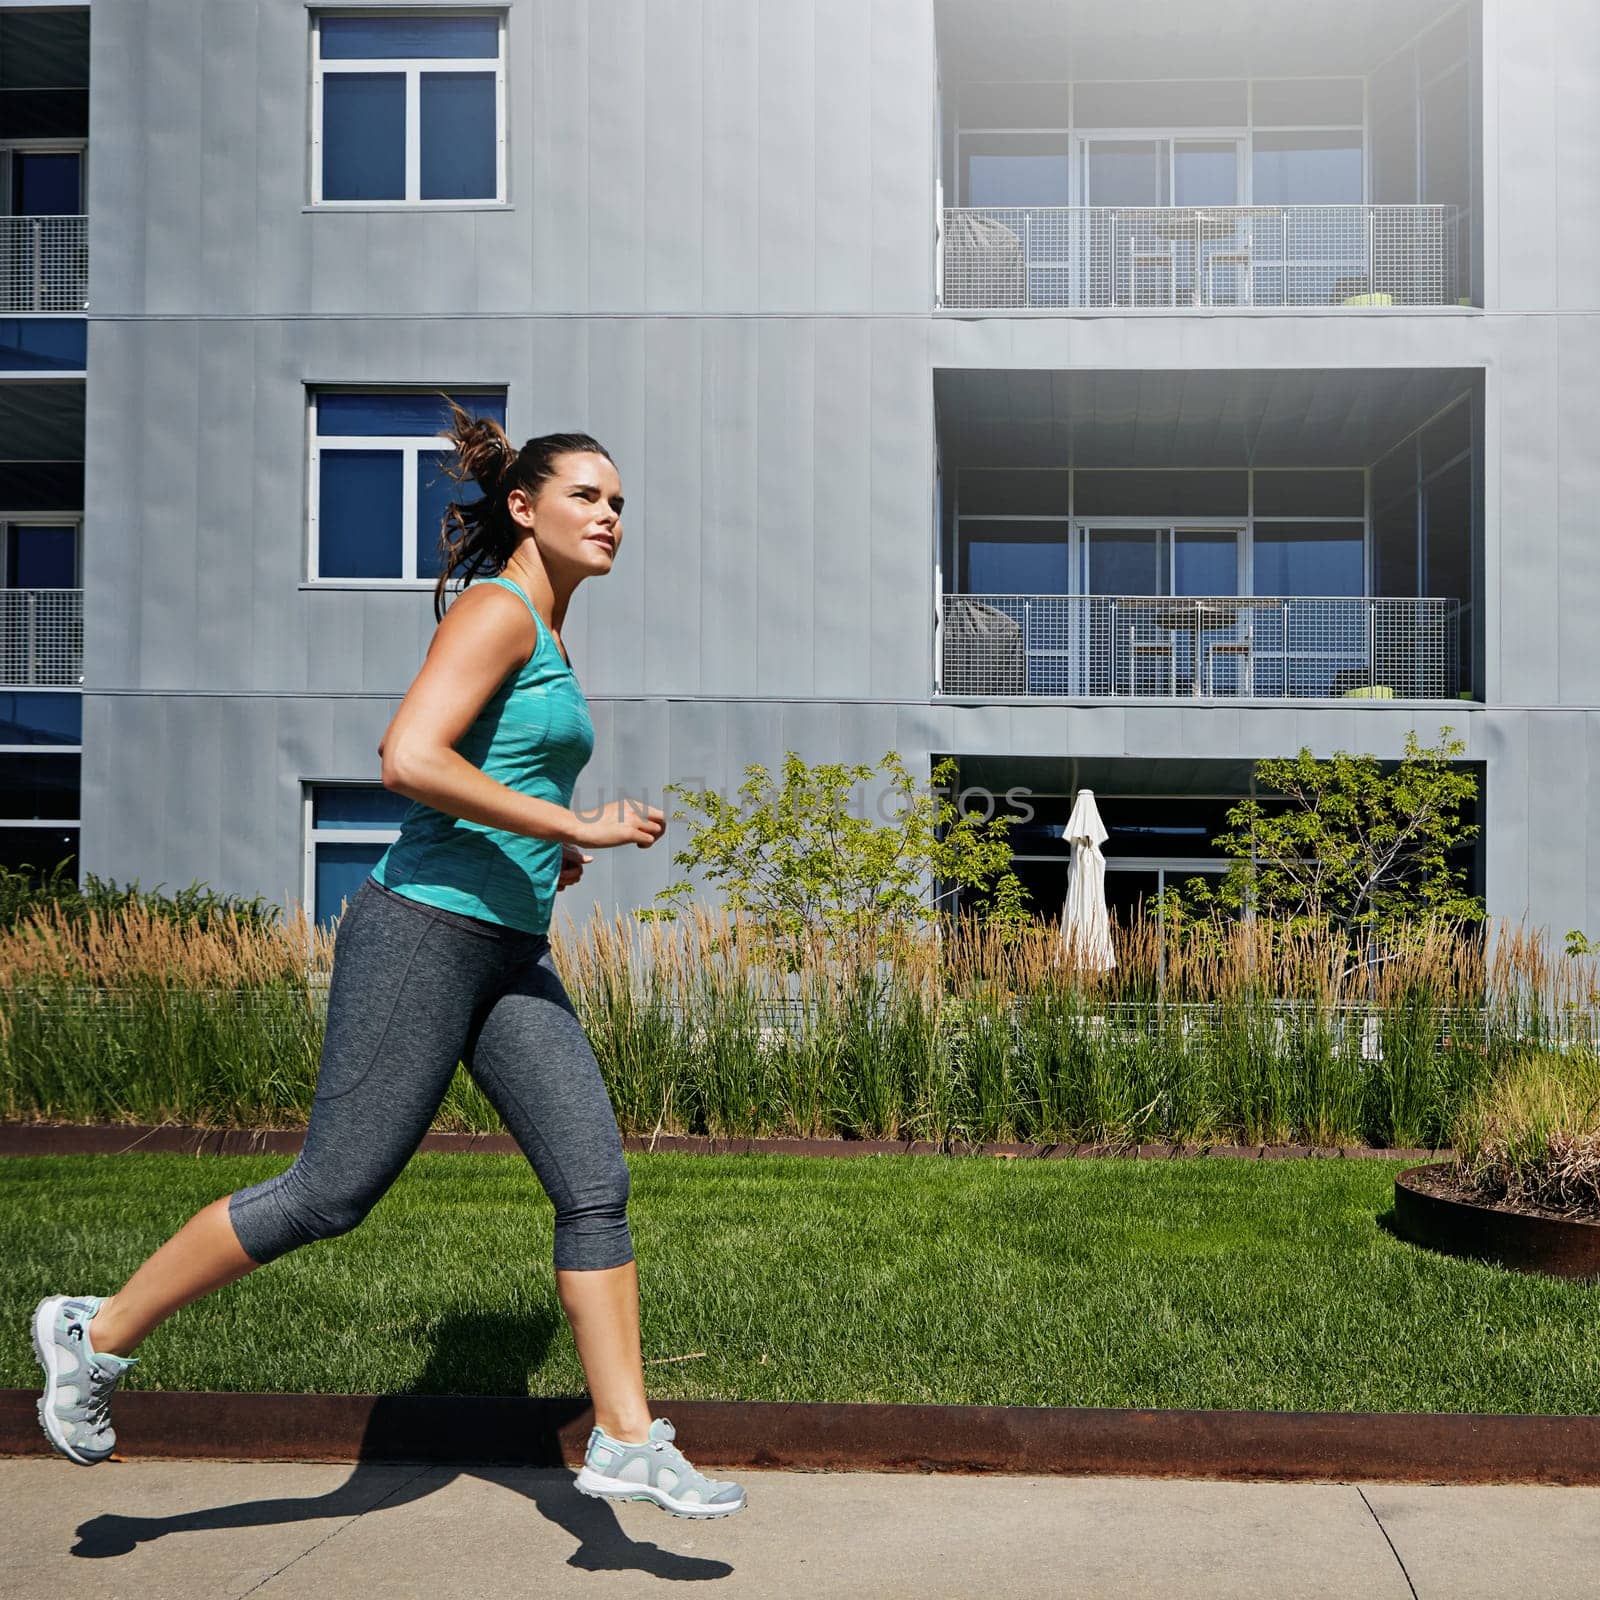 Exploring a new city through running. an attractive young female runner exercising outdoors